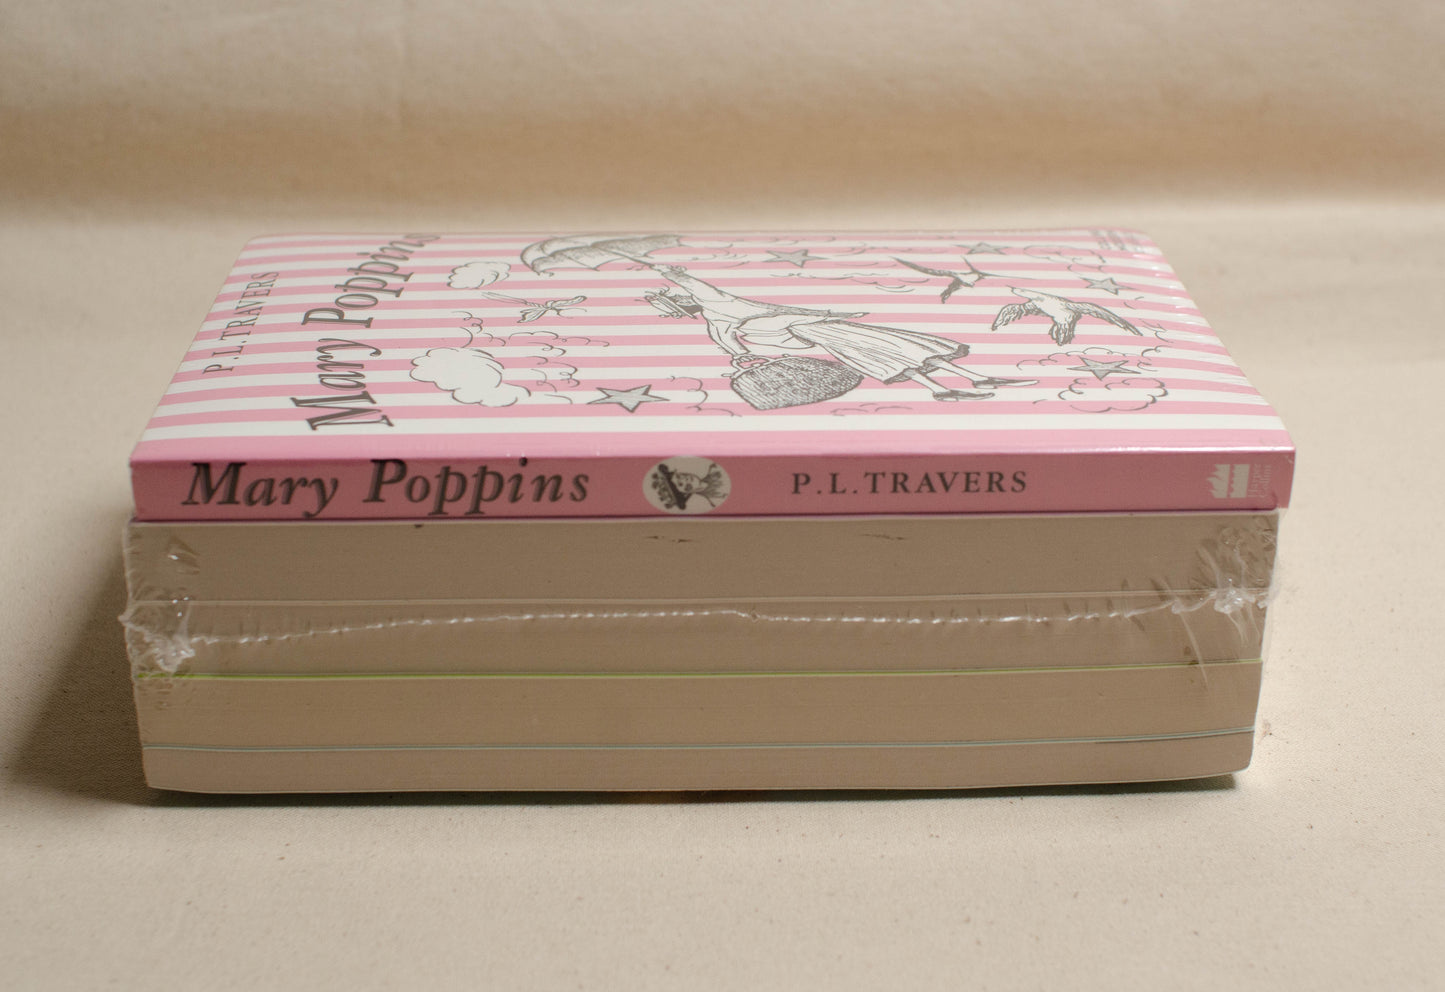 Mary Poppins 5 Books Collection Set By P. L. Travers